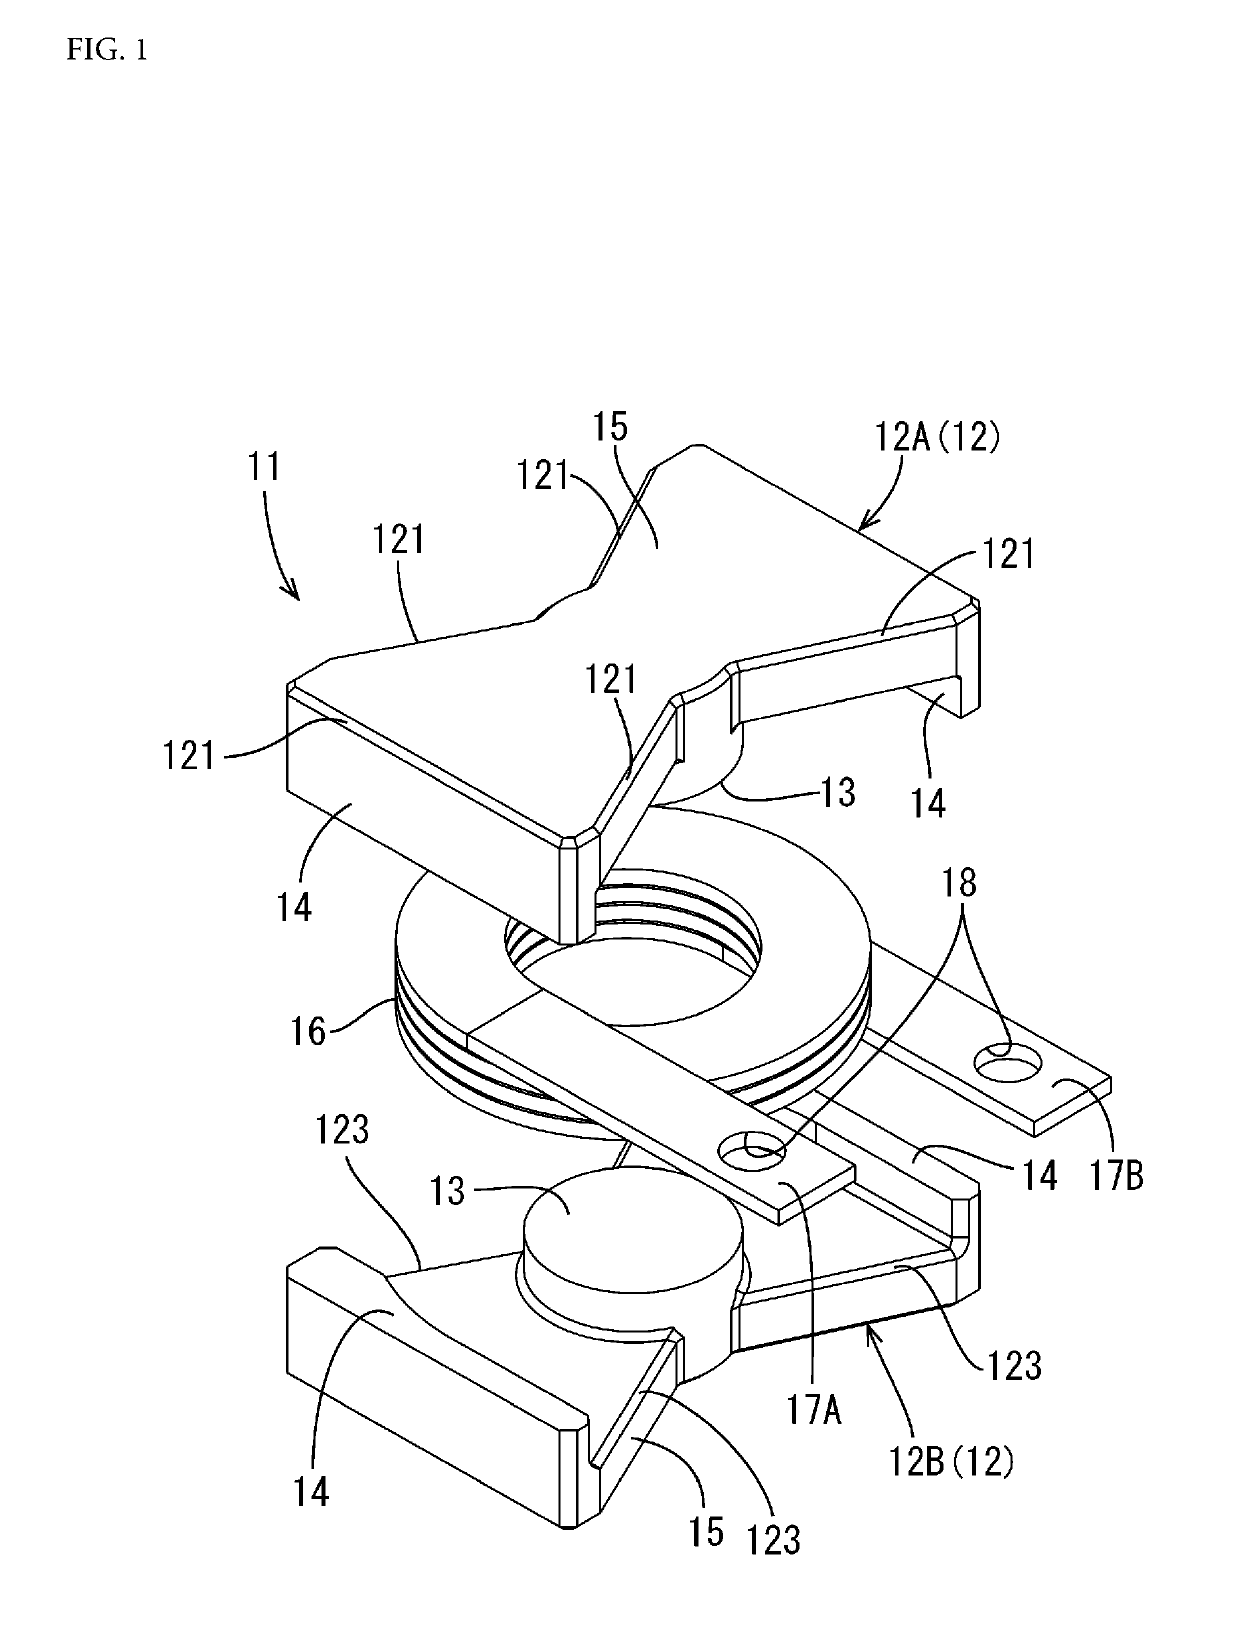 Coil assembly, structure for attaching coil assembly, and electrical connection box